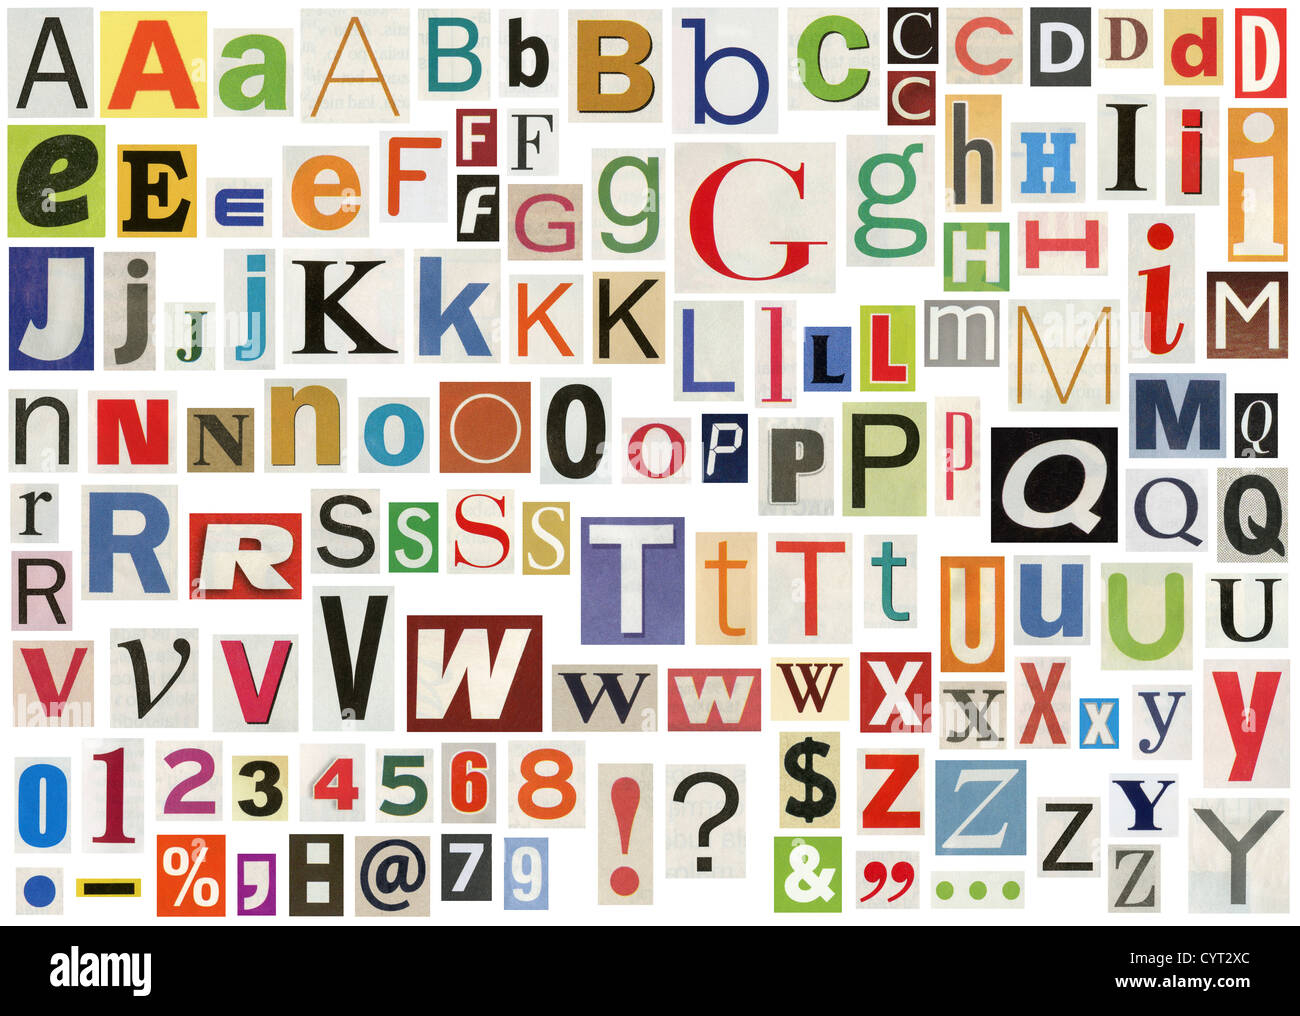 newspaper alphabet with letters numbers and symbols isolated on stock